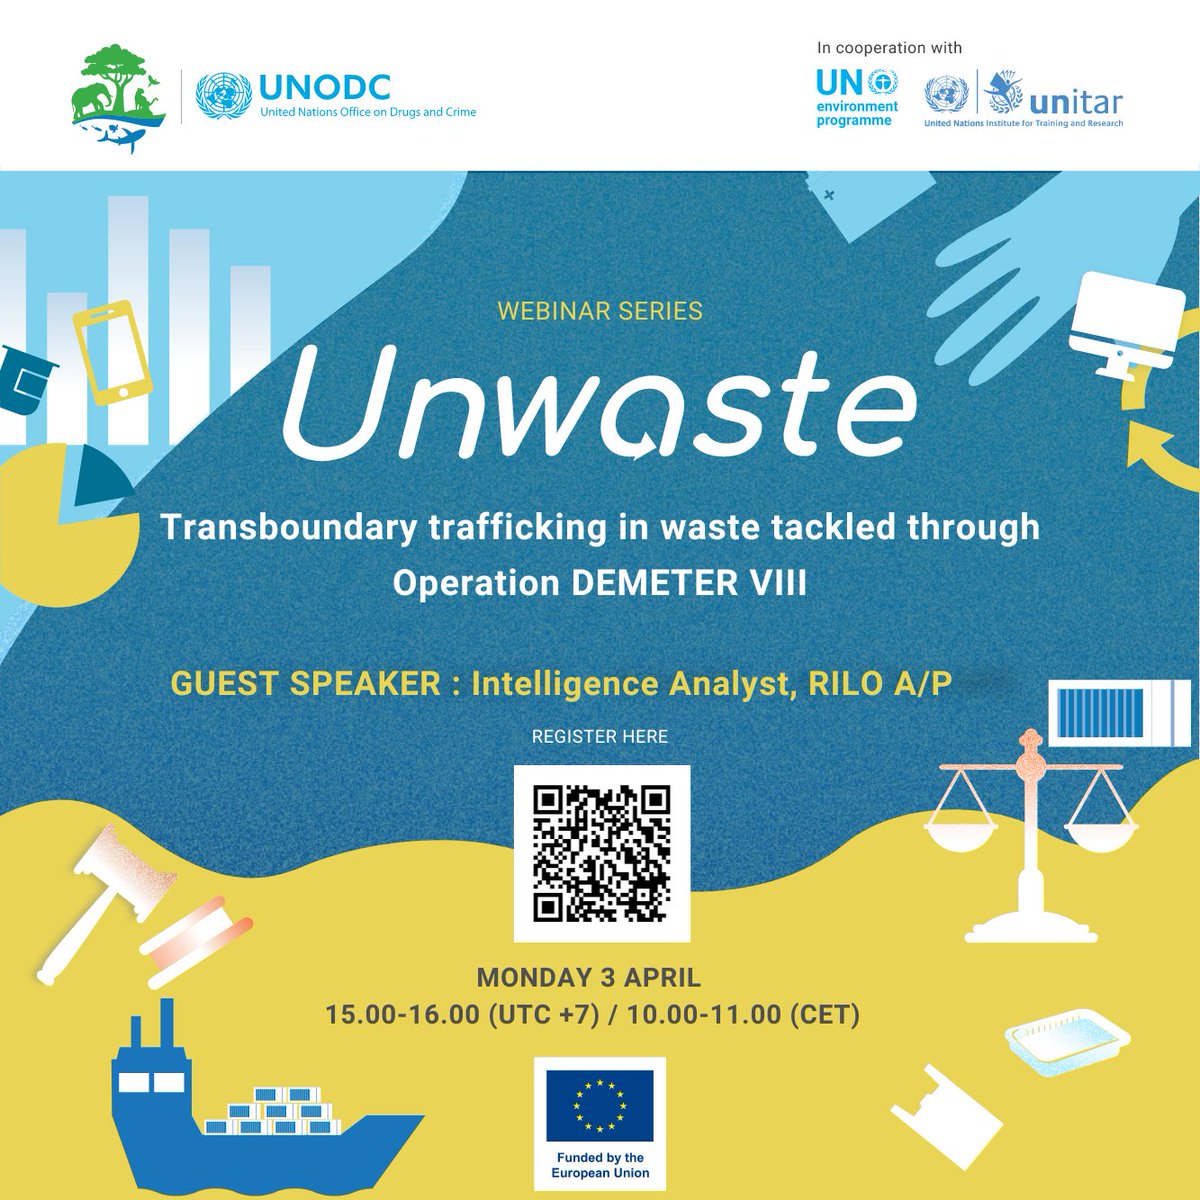 The #Unwaste webinar series is back! @WCO_OMD's RILO AP will share the results of Operation DEMETER VIII on illegal shipments of waste. Register: bit.ly/42BXuEN 🗓️3 Apr 🕑3pm UTC+7 10am CET #endENVcrime #organizedcrime